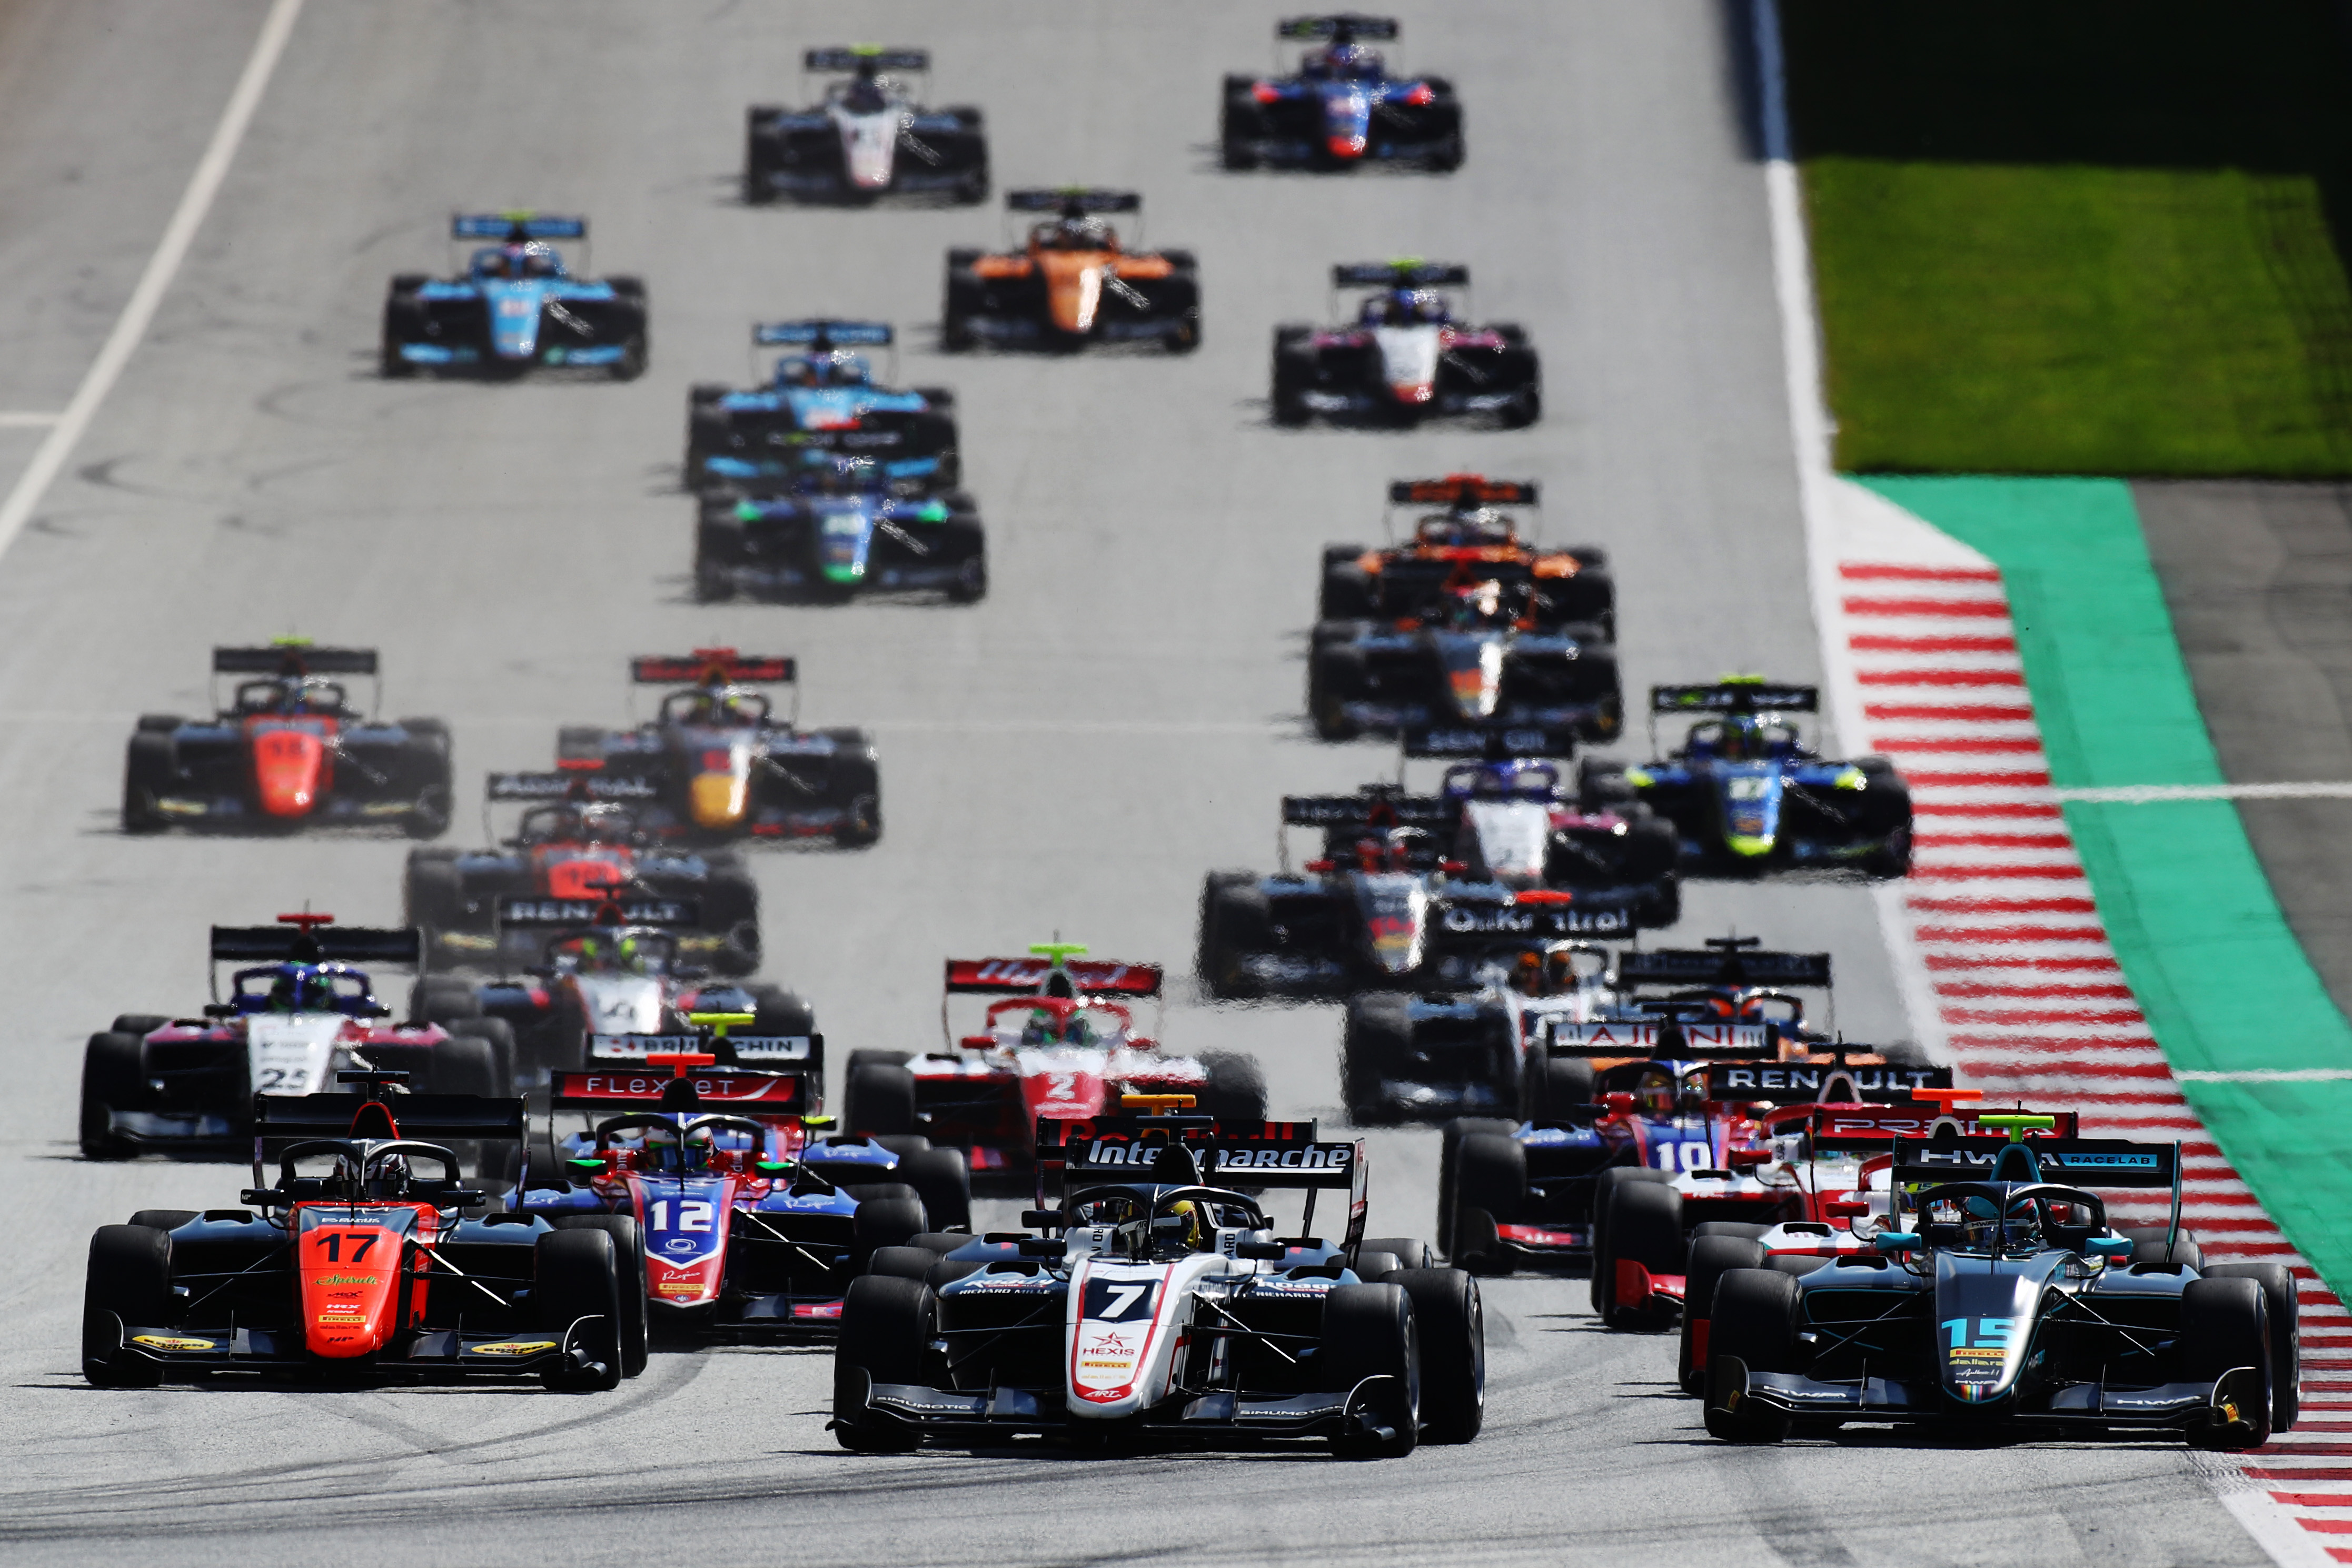 F2/F3 Power Rankings – Italian Grand Prix produces crazy CHAOS and twists 